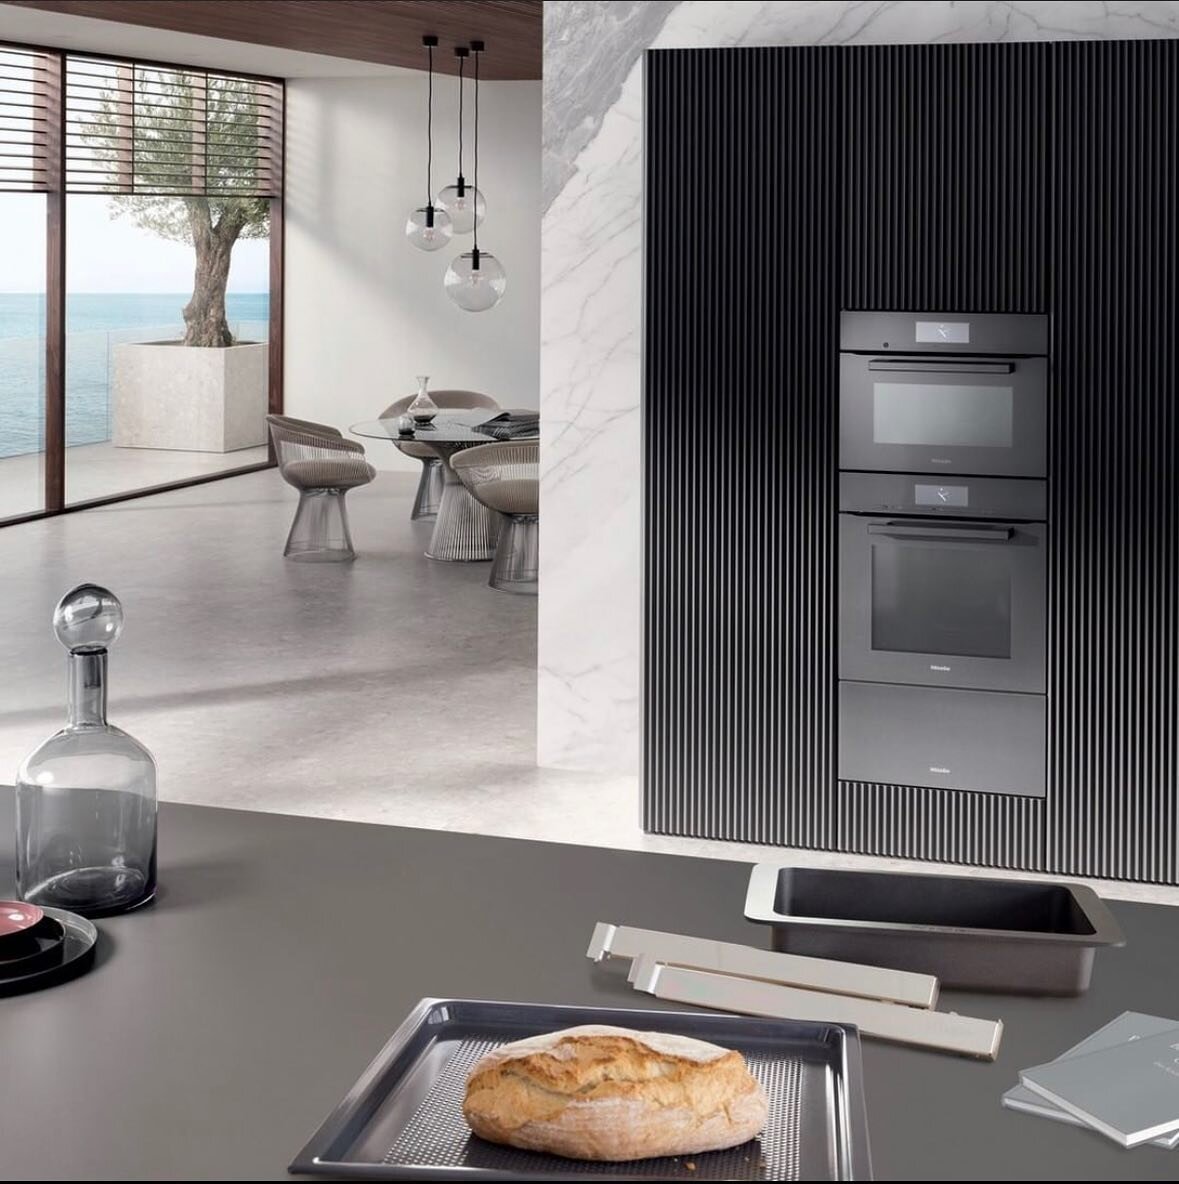 Perfect aesthetics and design with Miele ovens. 
Available in different colors.